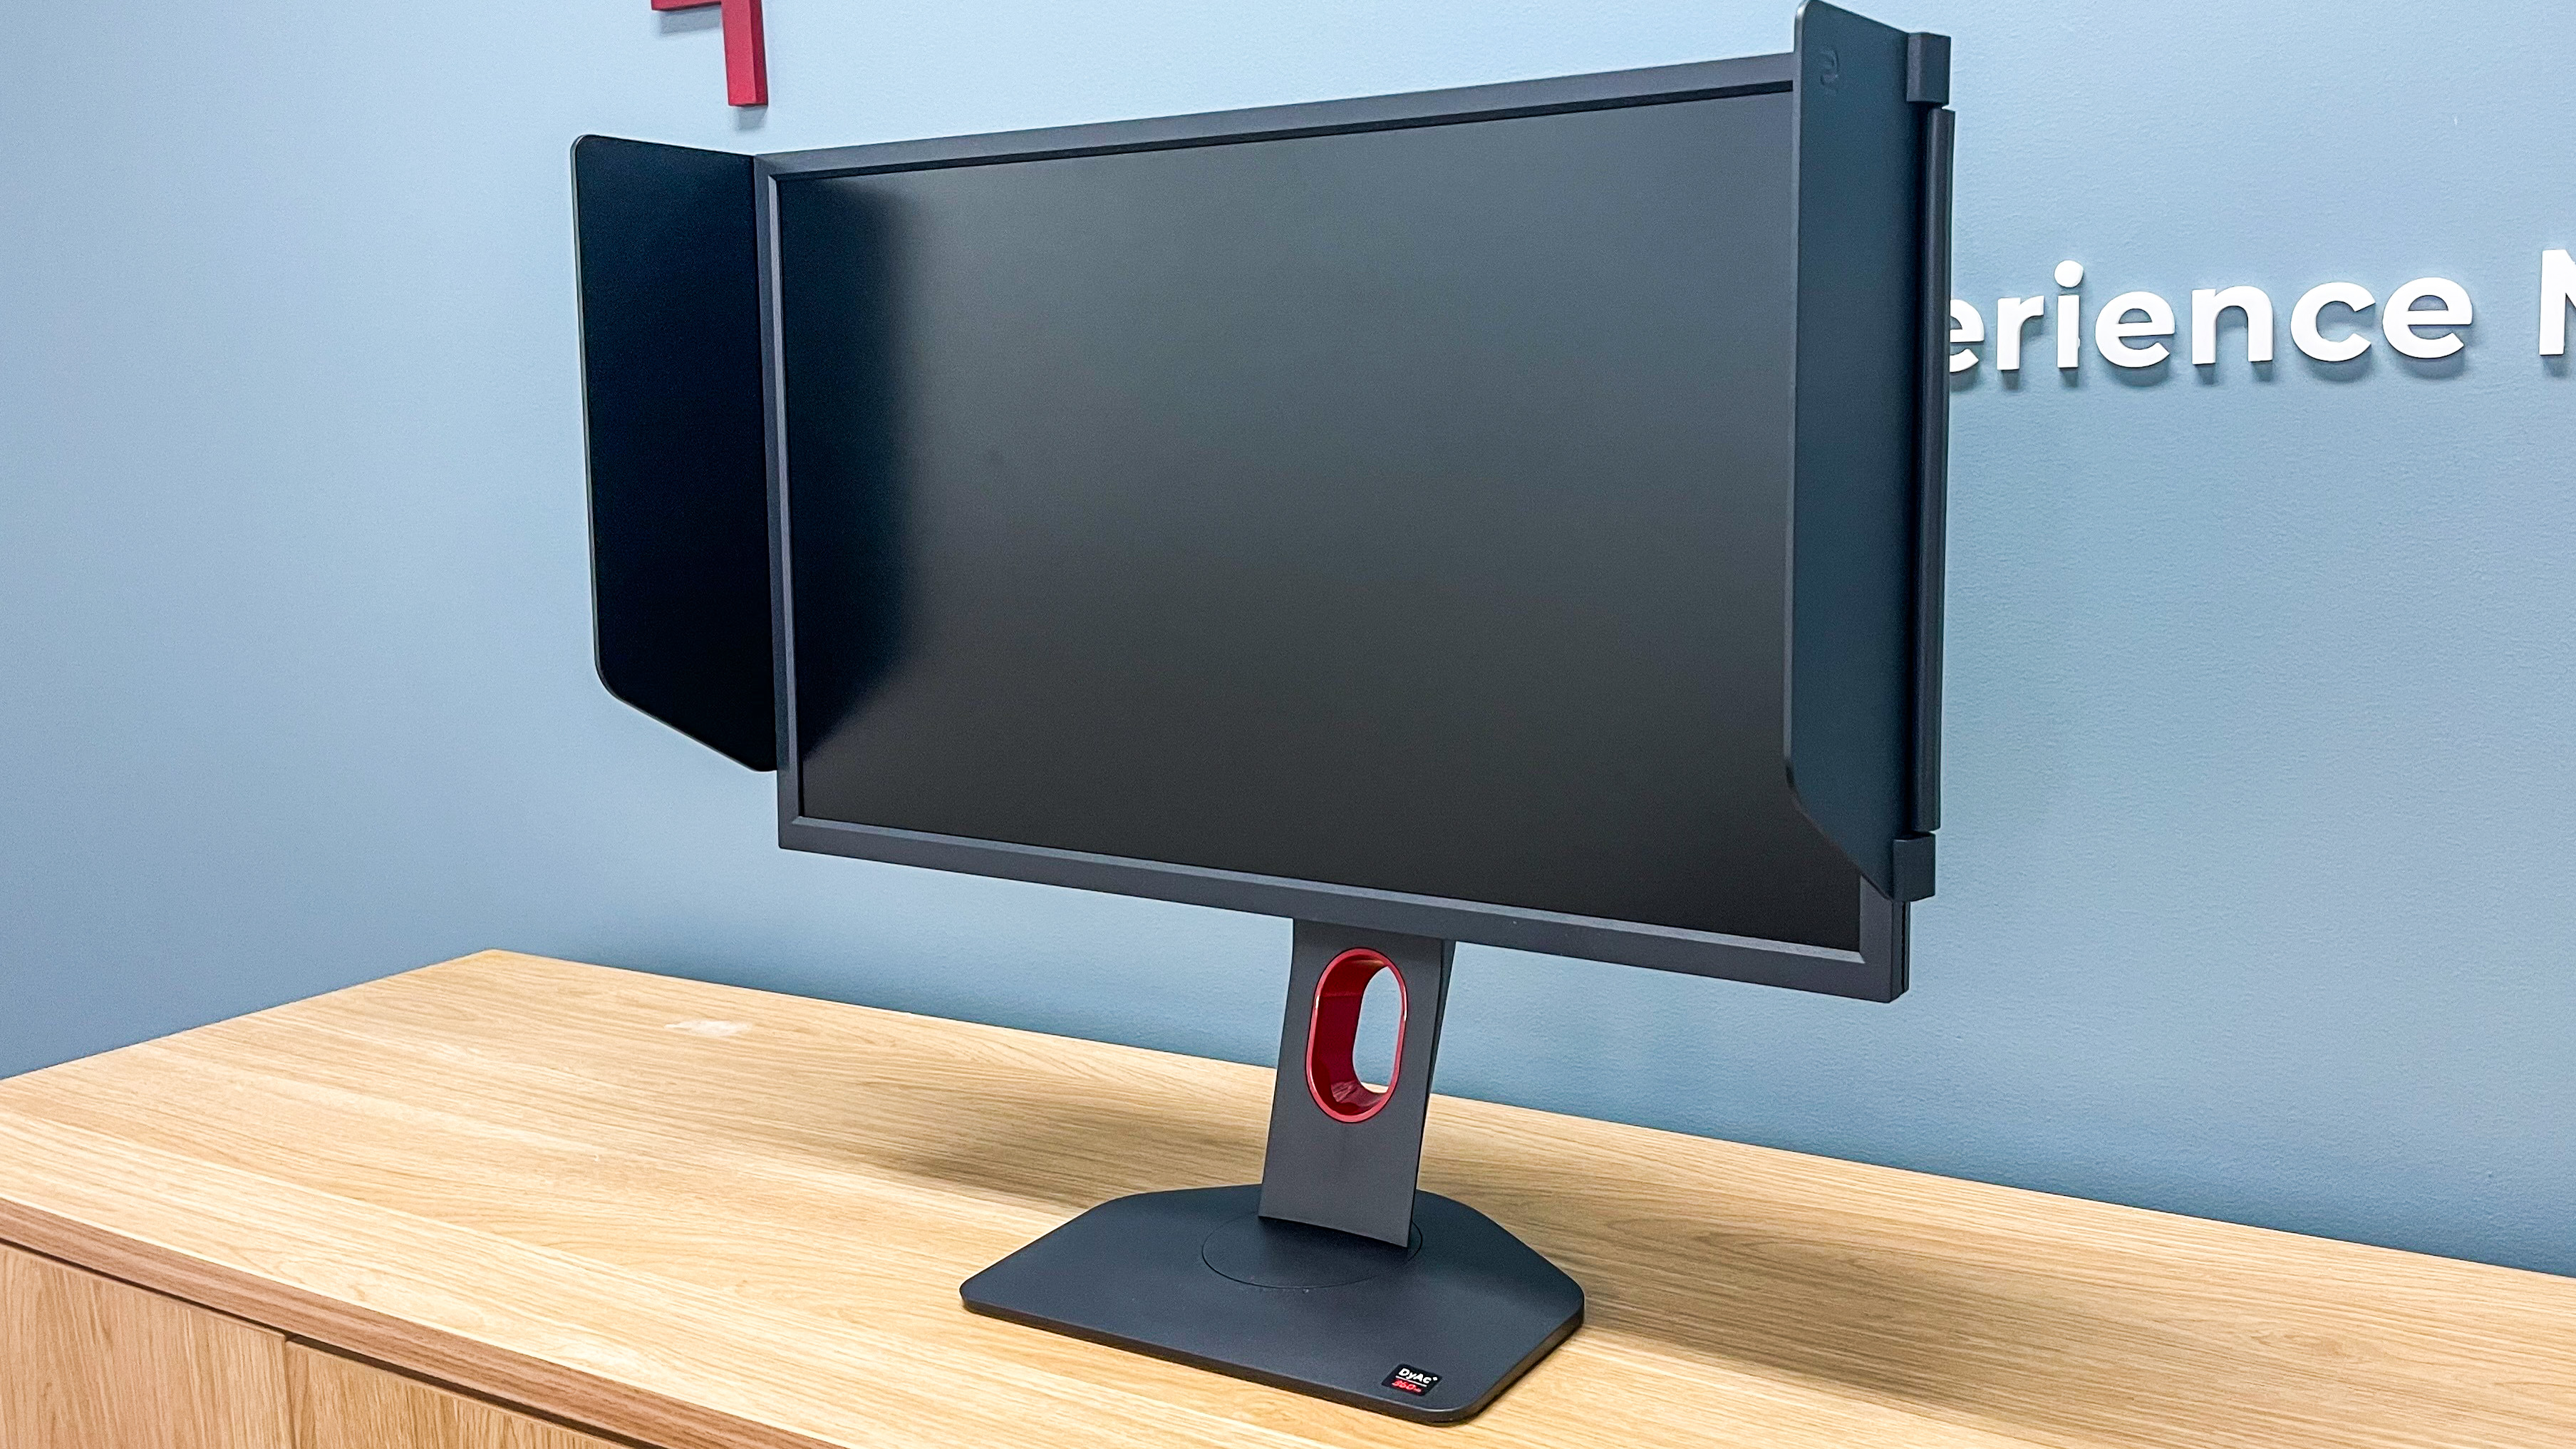 BenQ Zowie XL2566K gaming monitor with blinkers attached